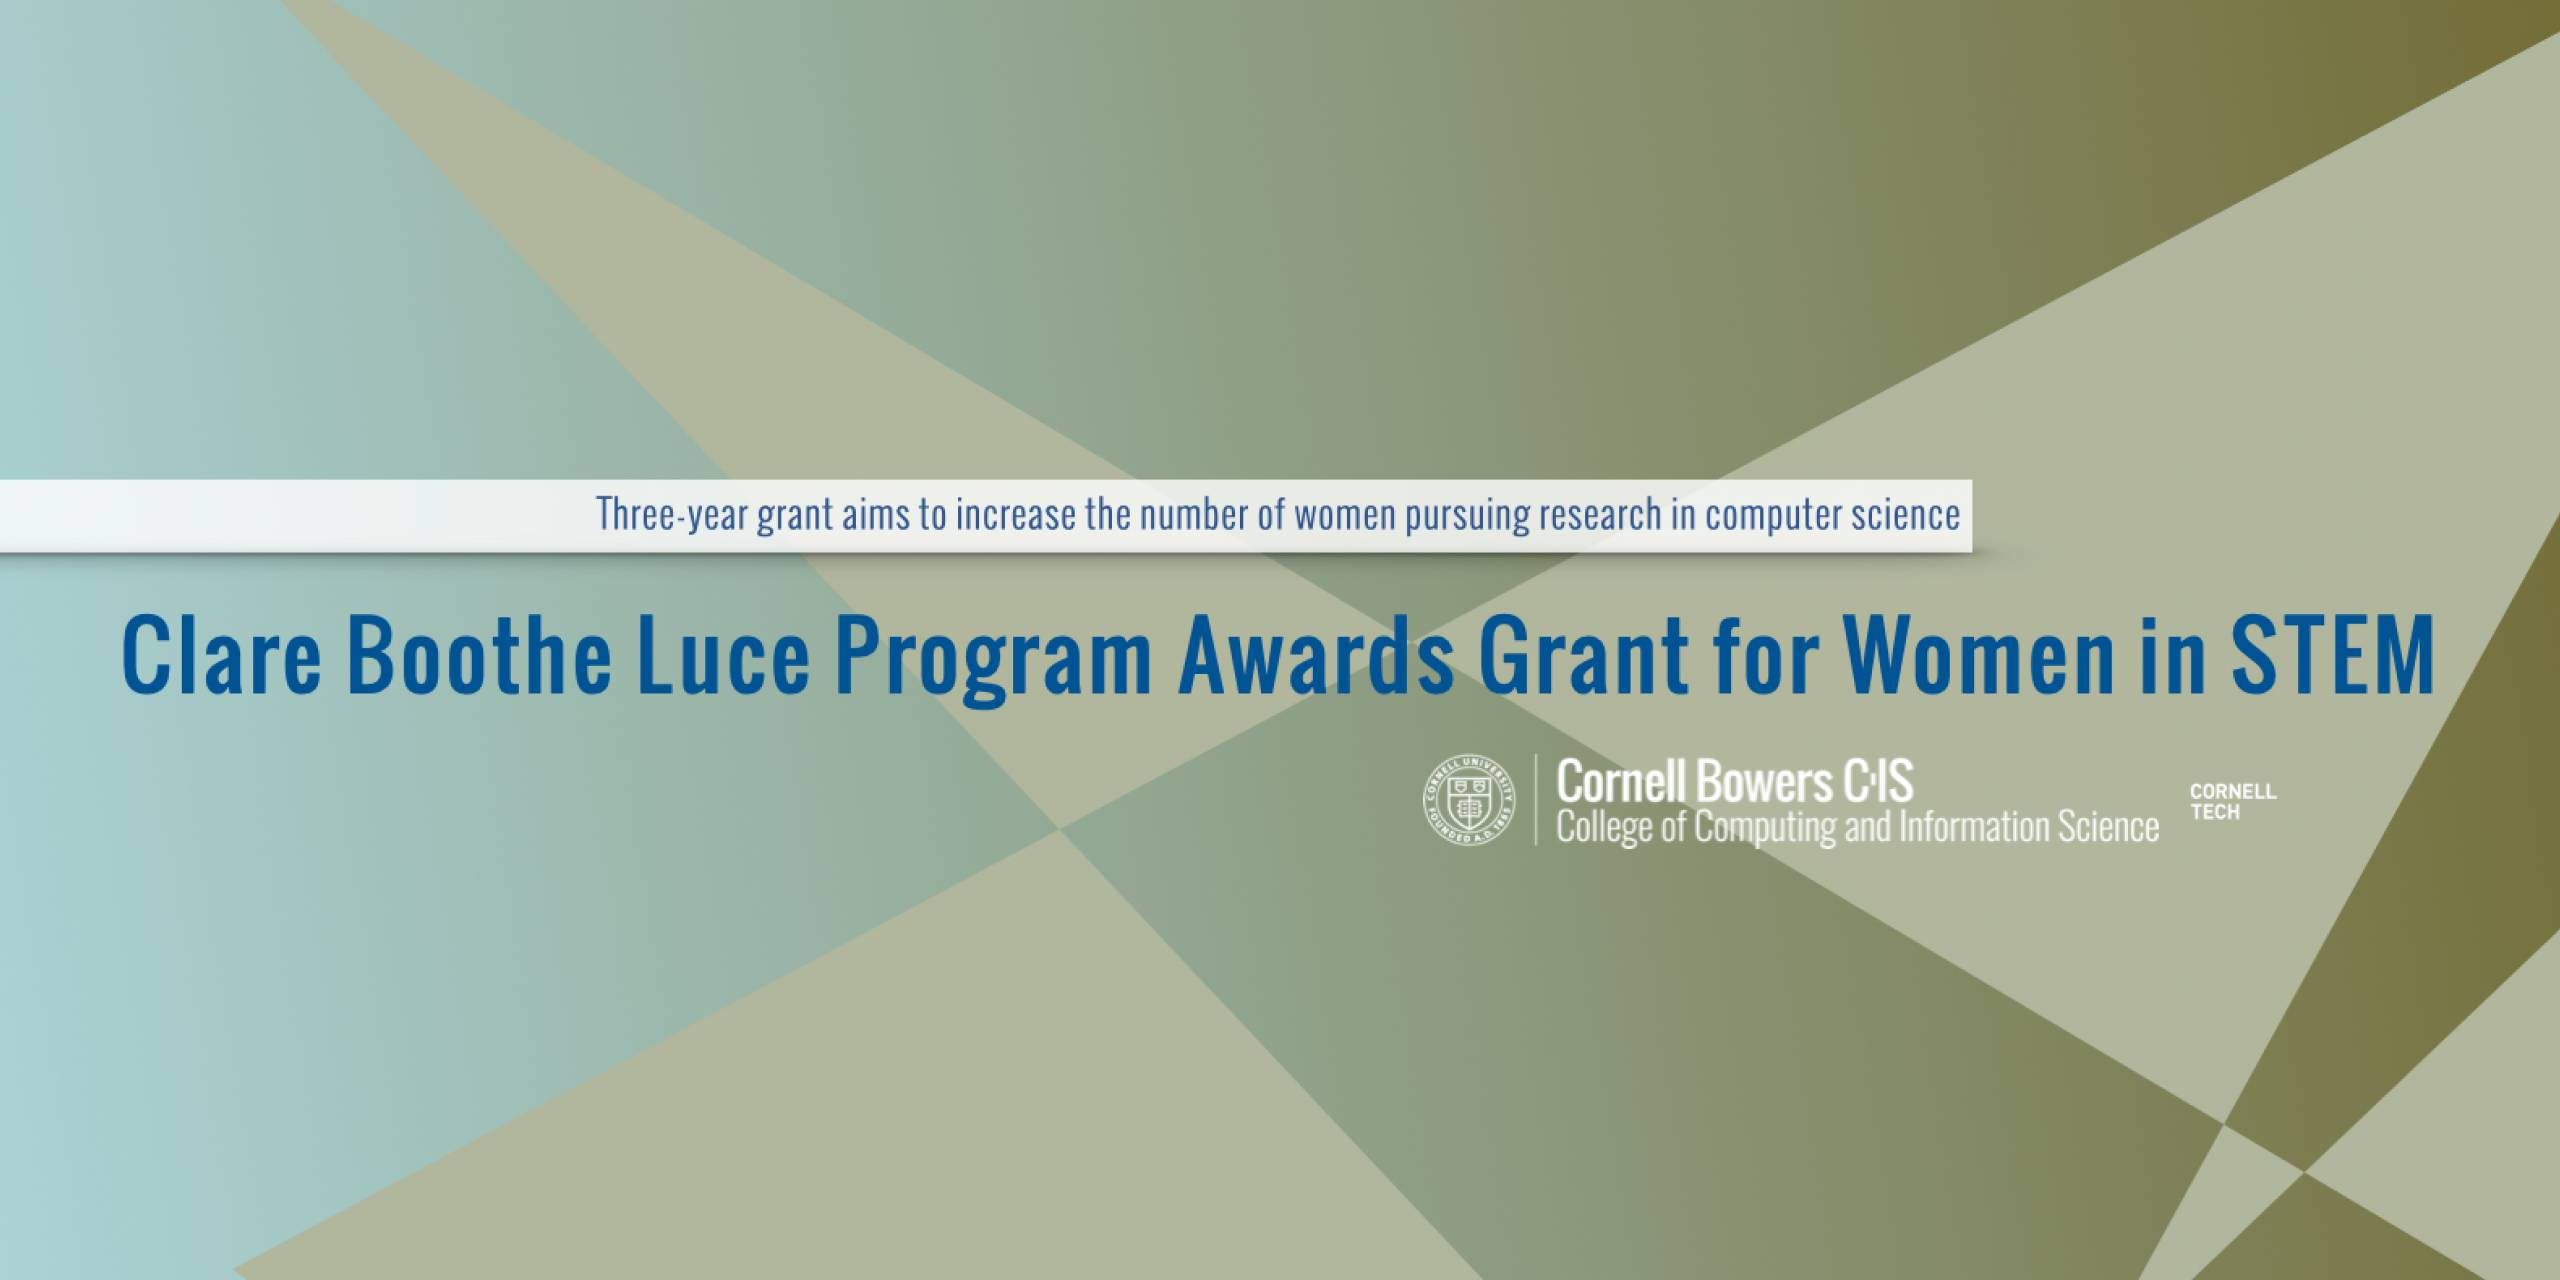 Clare Booth Luce Grant Awarded to Cornell Bowers CIS to Promote Women in STEM, Computer Science